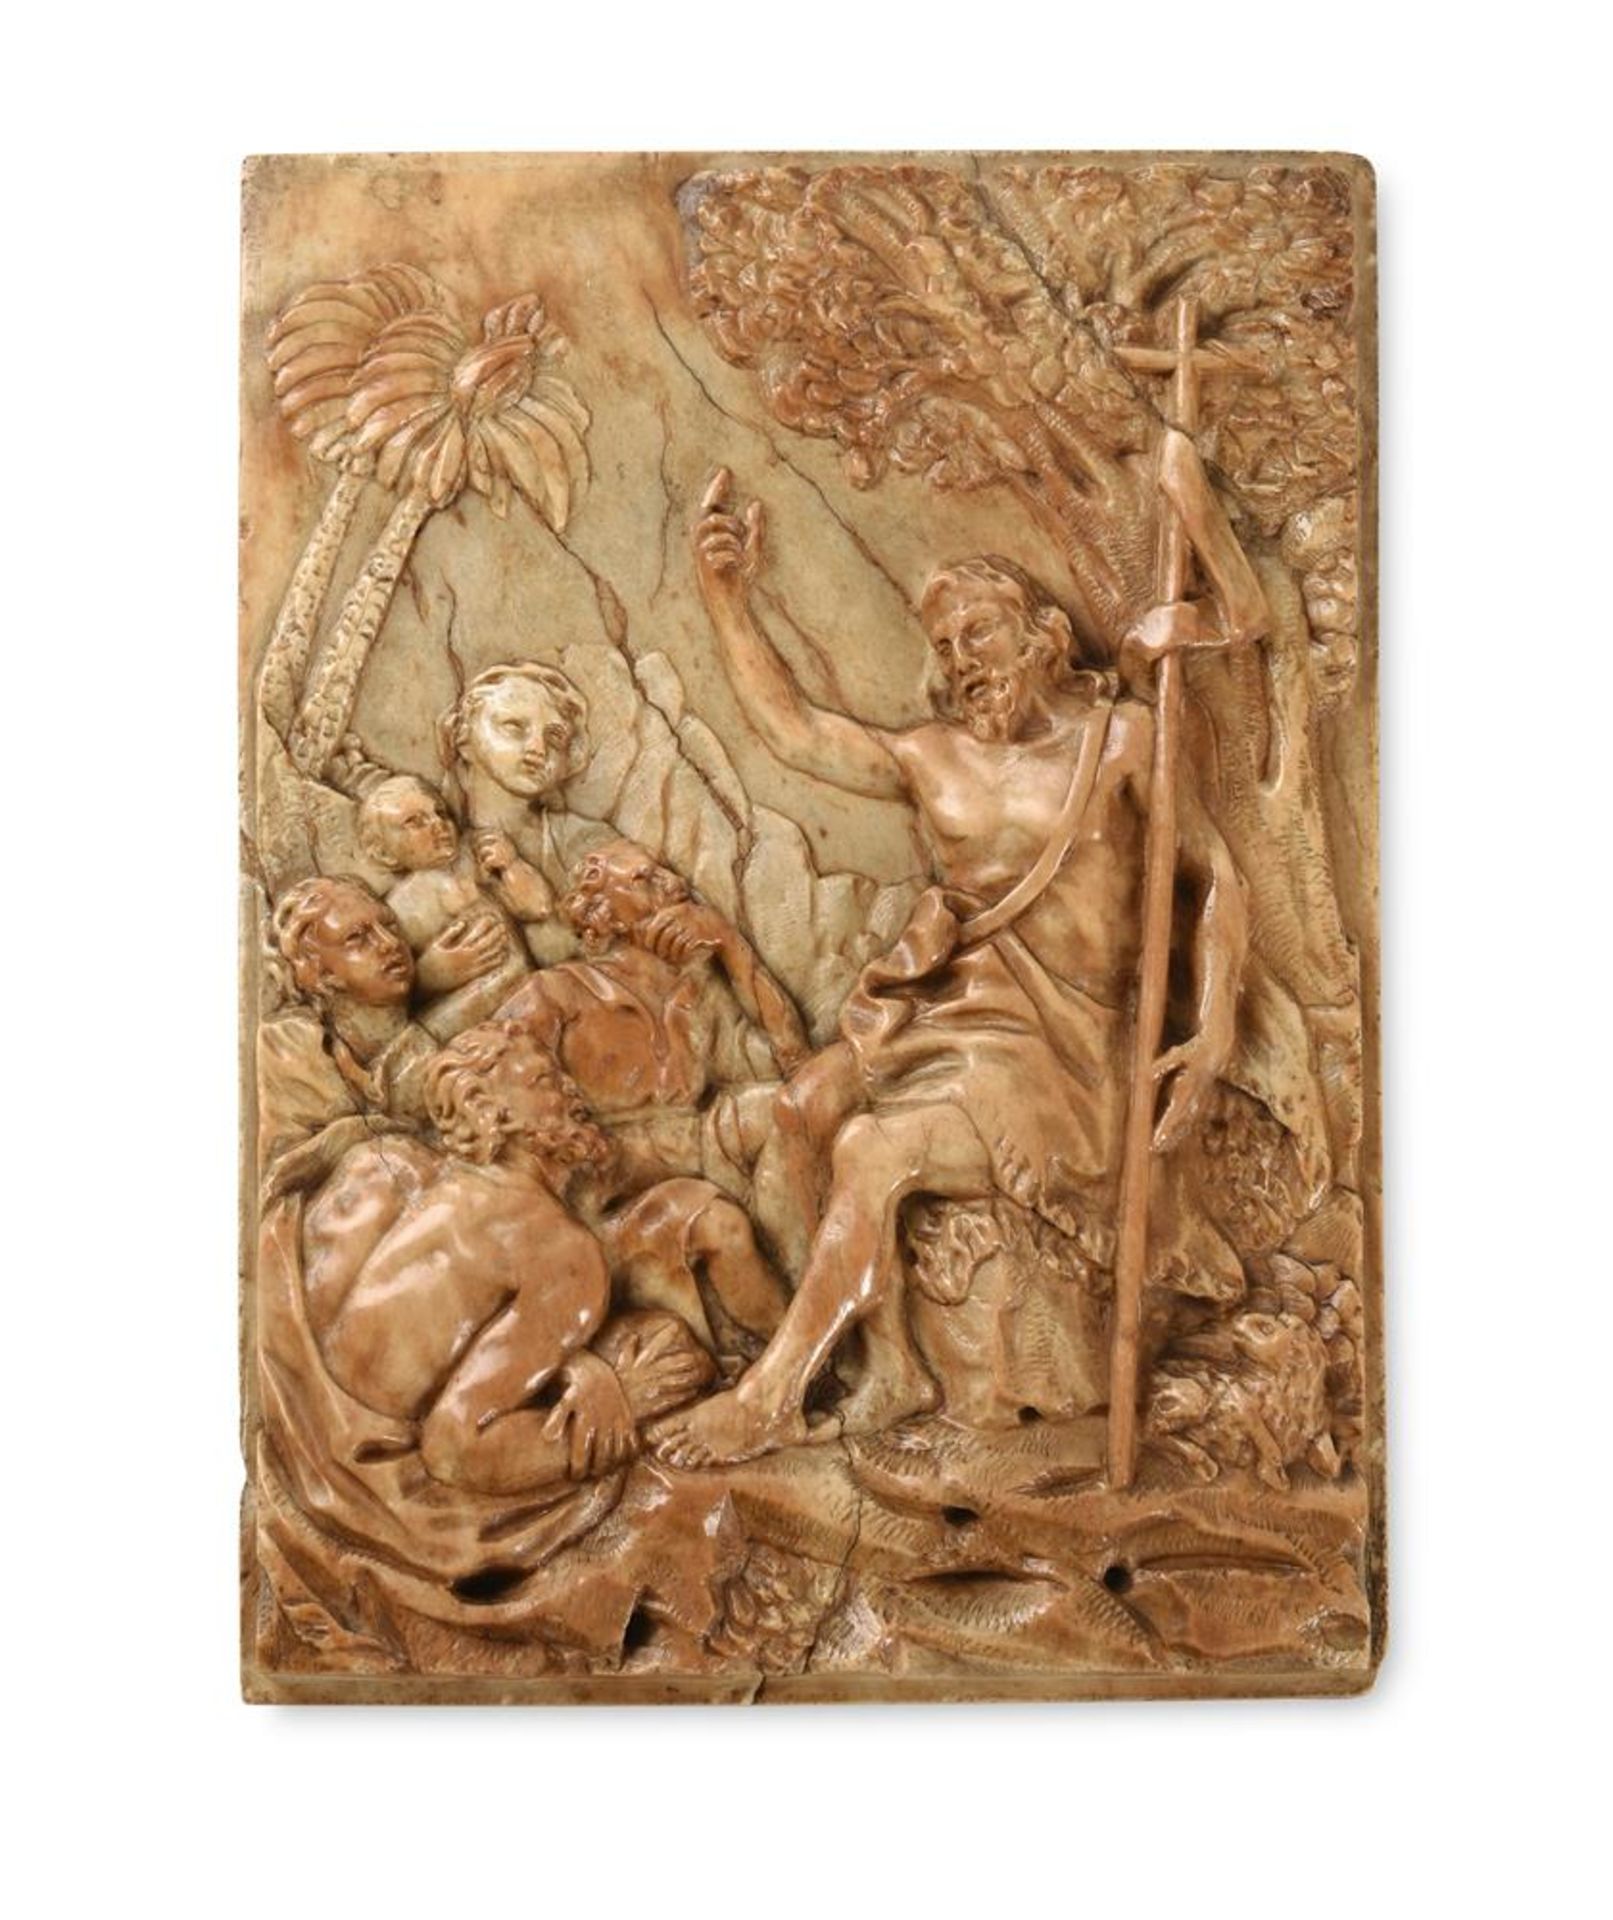 A CARVED STONE PLAQUE DEPICTING CHRIST PREACHING, POSSIBLY ITALIAN, EARLY 17TH CENTURY